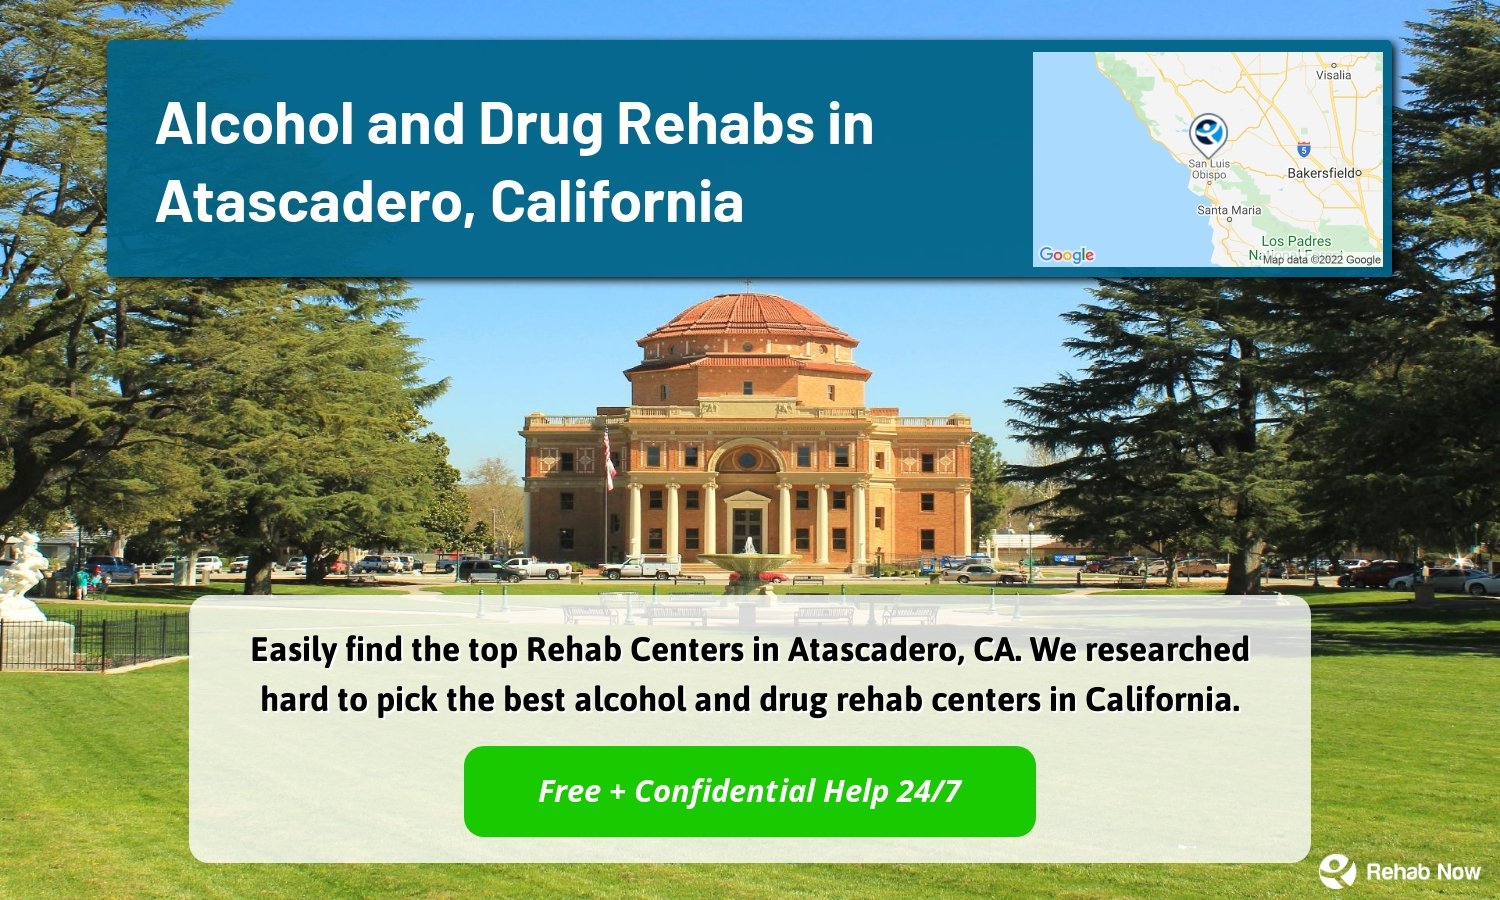 Easily find the top Rehab Centers in Atascadero, CA. We researched hard to pick the best alcohol and drug rehab centers in California.